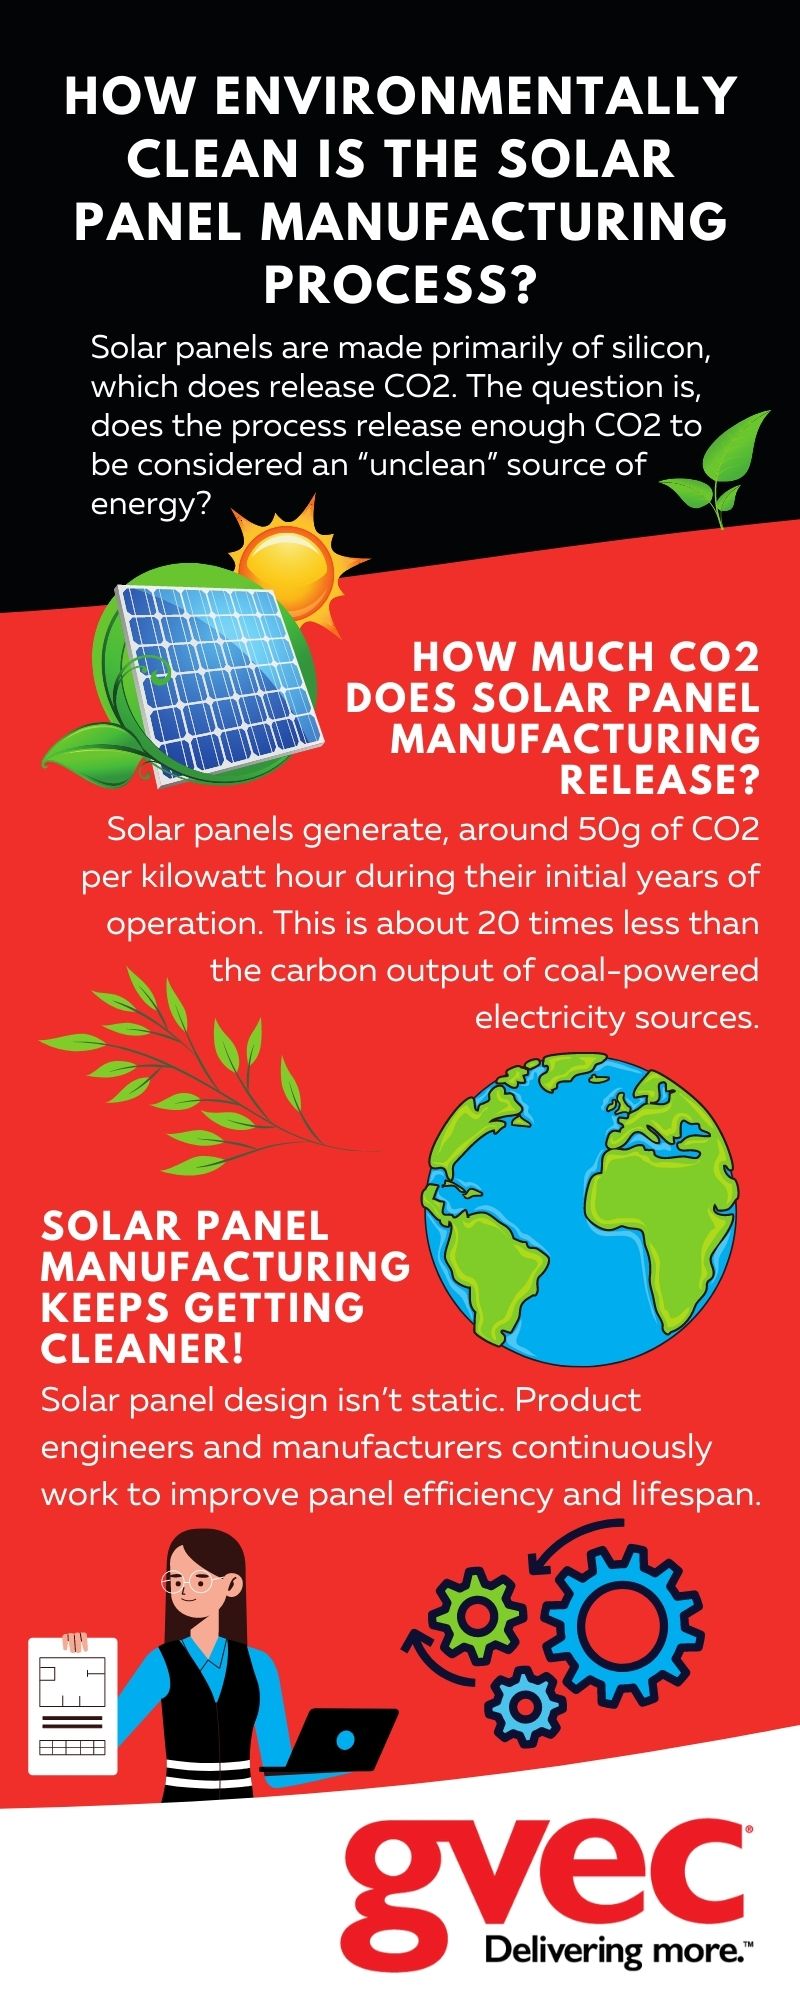 How Clean is the Solar Panel Manufacturing Process? How Much Carbon Dioxide is Produced?